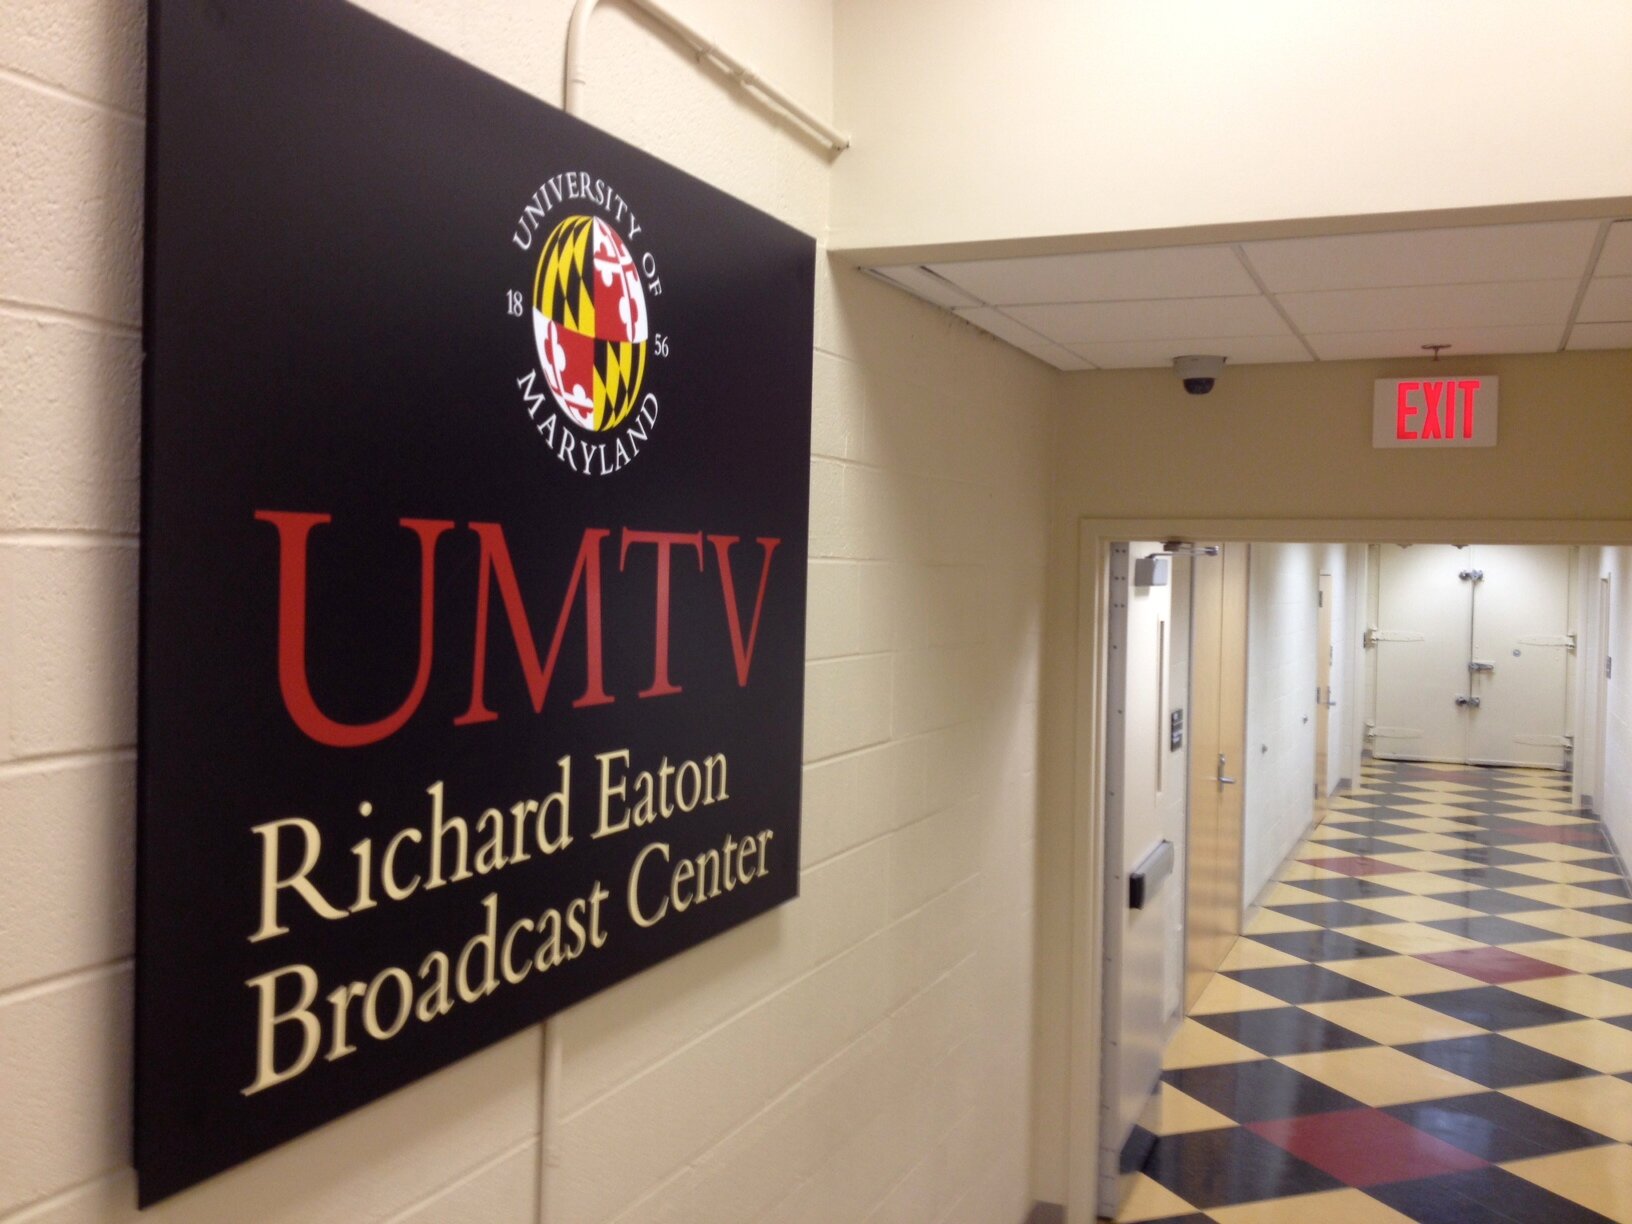 UMTV is the cable television station operated by the Philip Merrill College of Journalism at UMD. On Campus: 38; Comcast: PG 73 MoCo 2; Verizon 40 in PG & MoCo